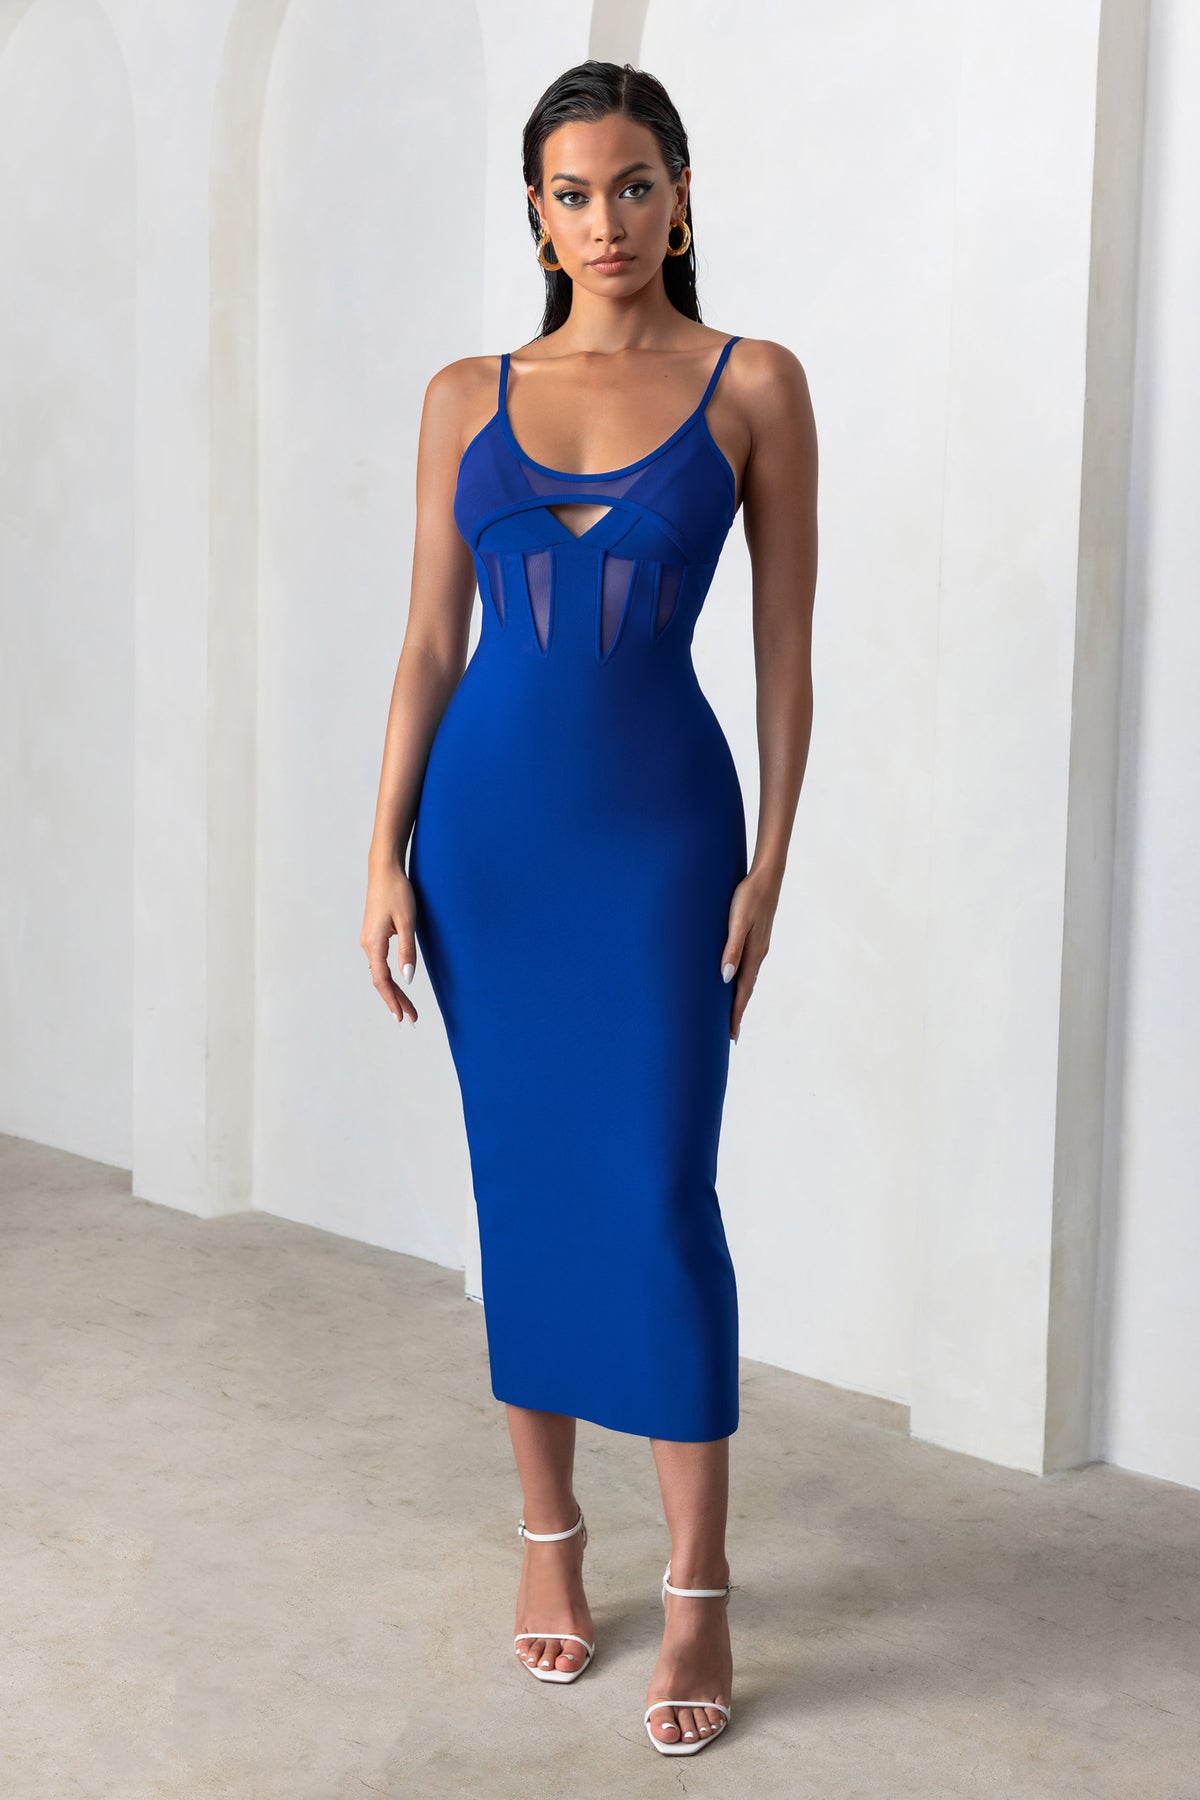 Destiny Calling Electric Blue Bandage Mesh Cut Out Midi Dress with